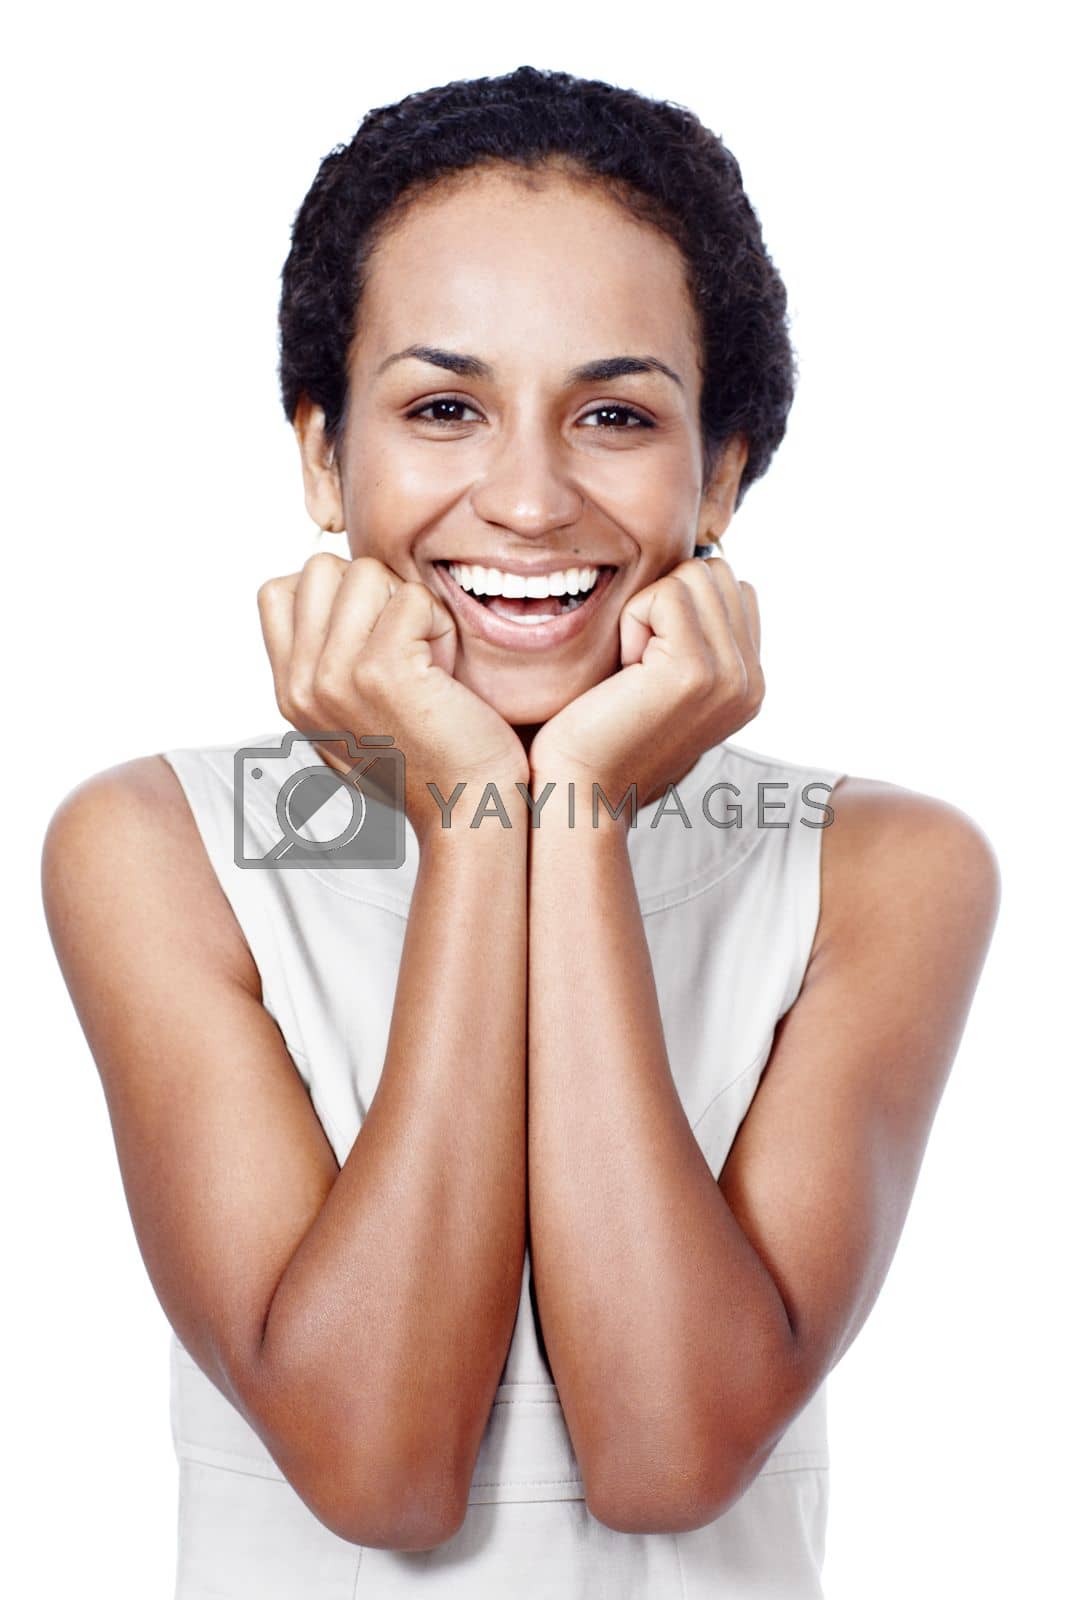 Royalty free image of Shes got a winning smile. Studio shot of a confident woman posing against a white background. by YuriArcurs